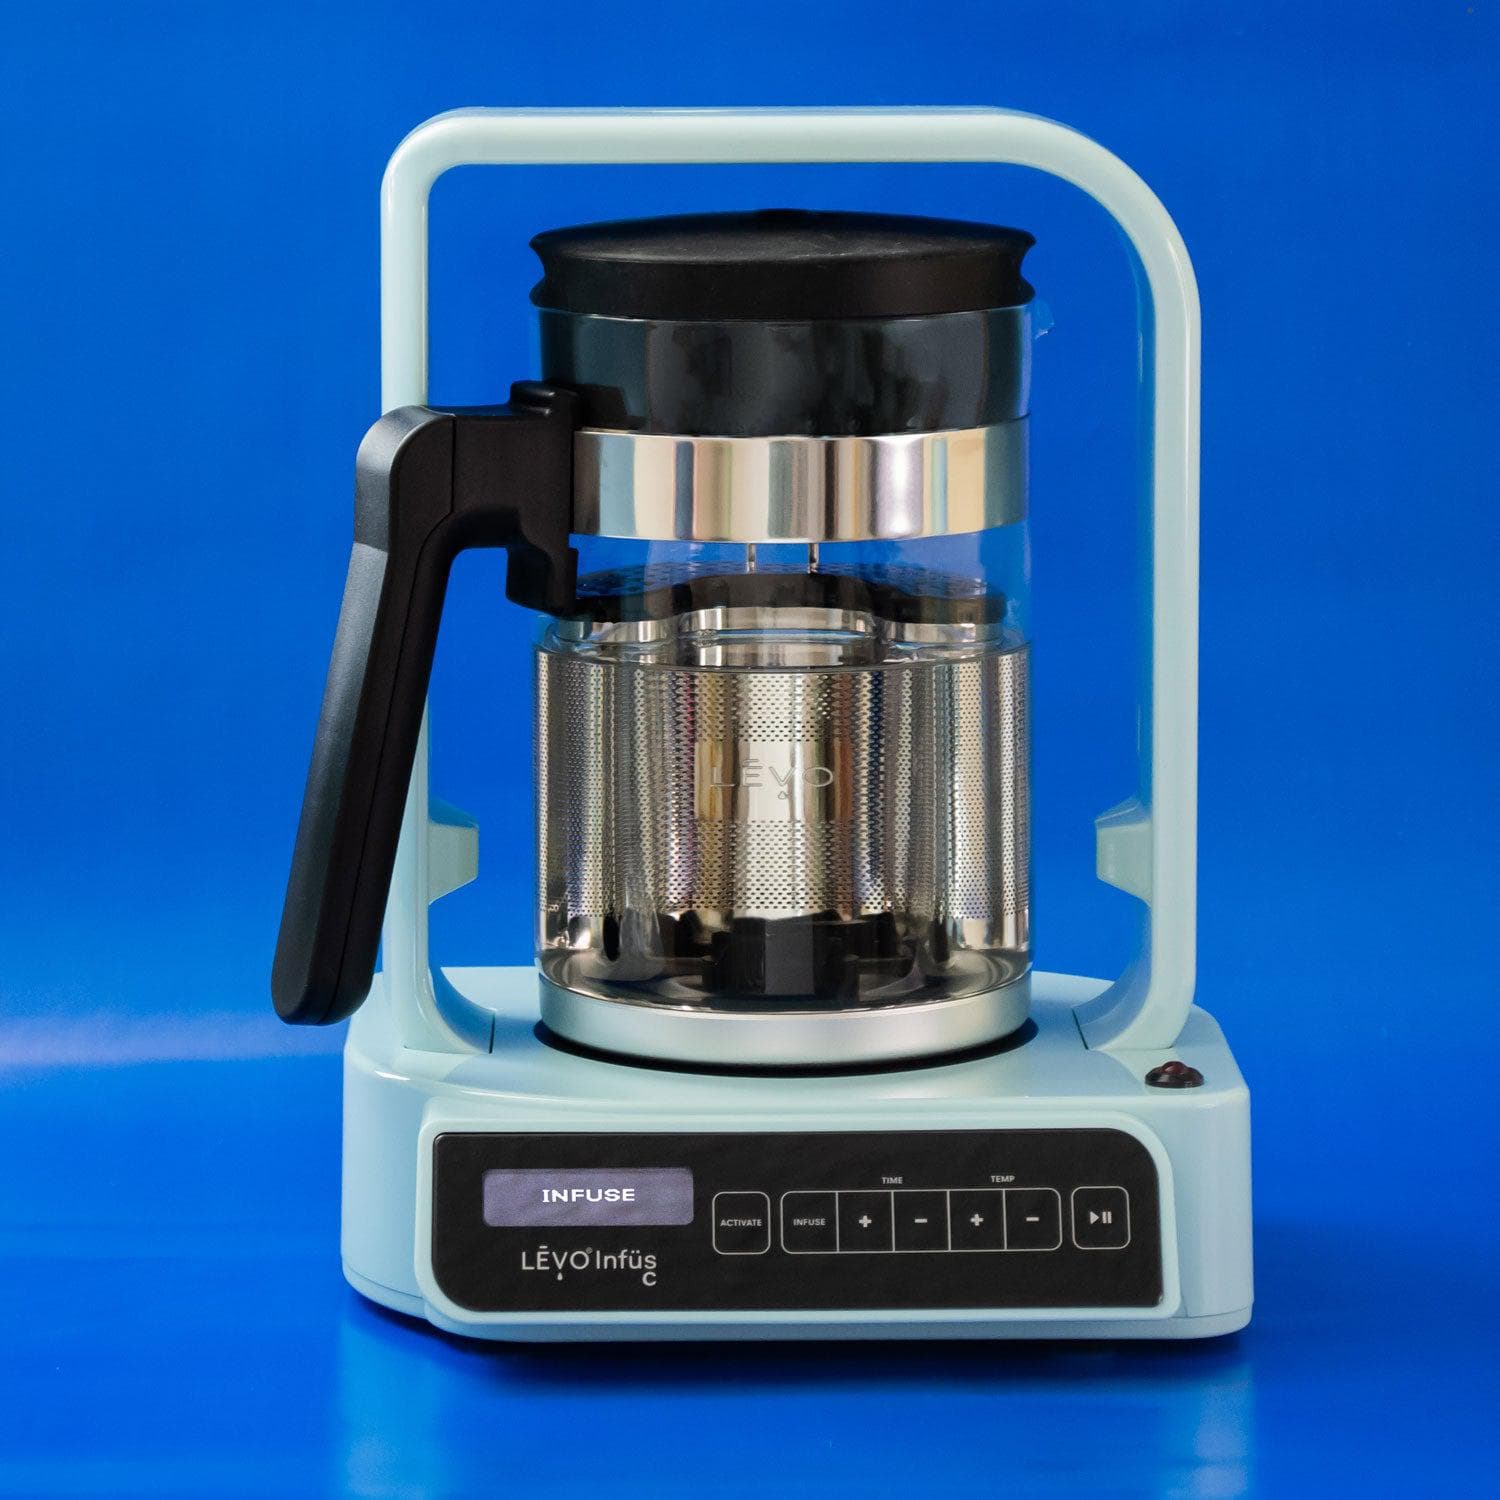 New Sky Blue LEVO C is perfect for infusing over 4 cups of oil or butter at a time with your favorite herbs.